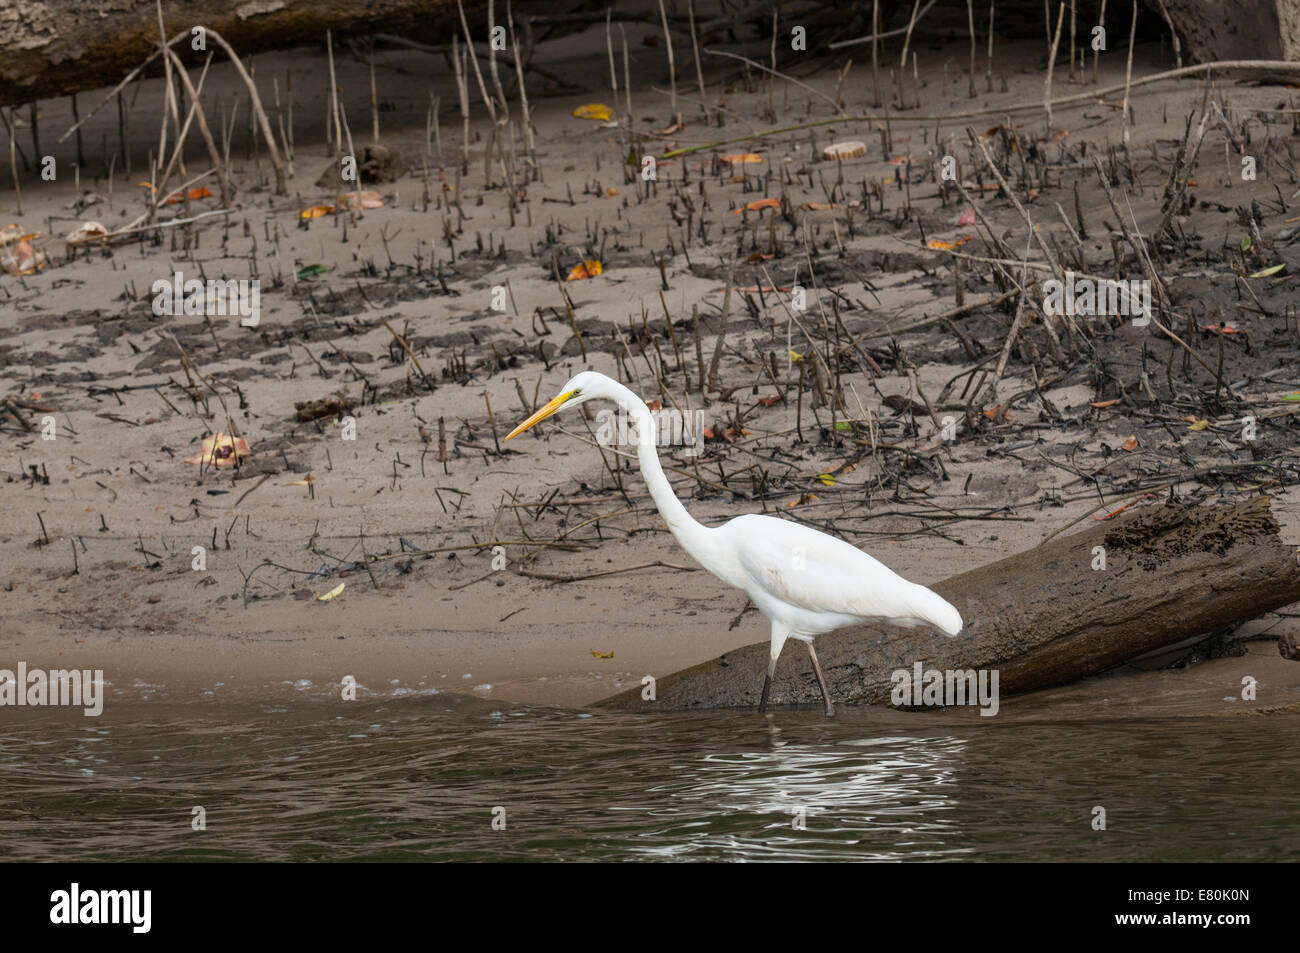 Stock photo of a great egret, Daintree River. Stock Photo